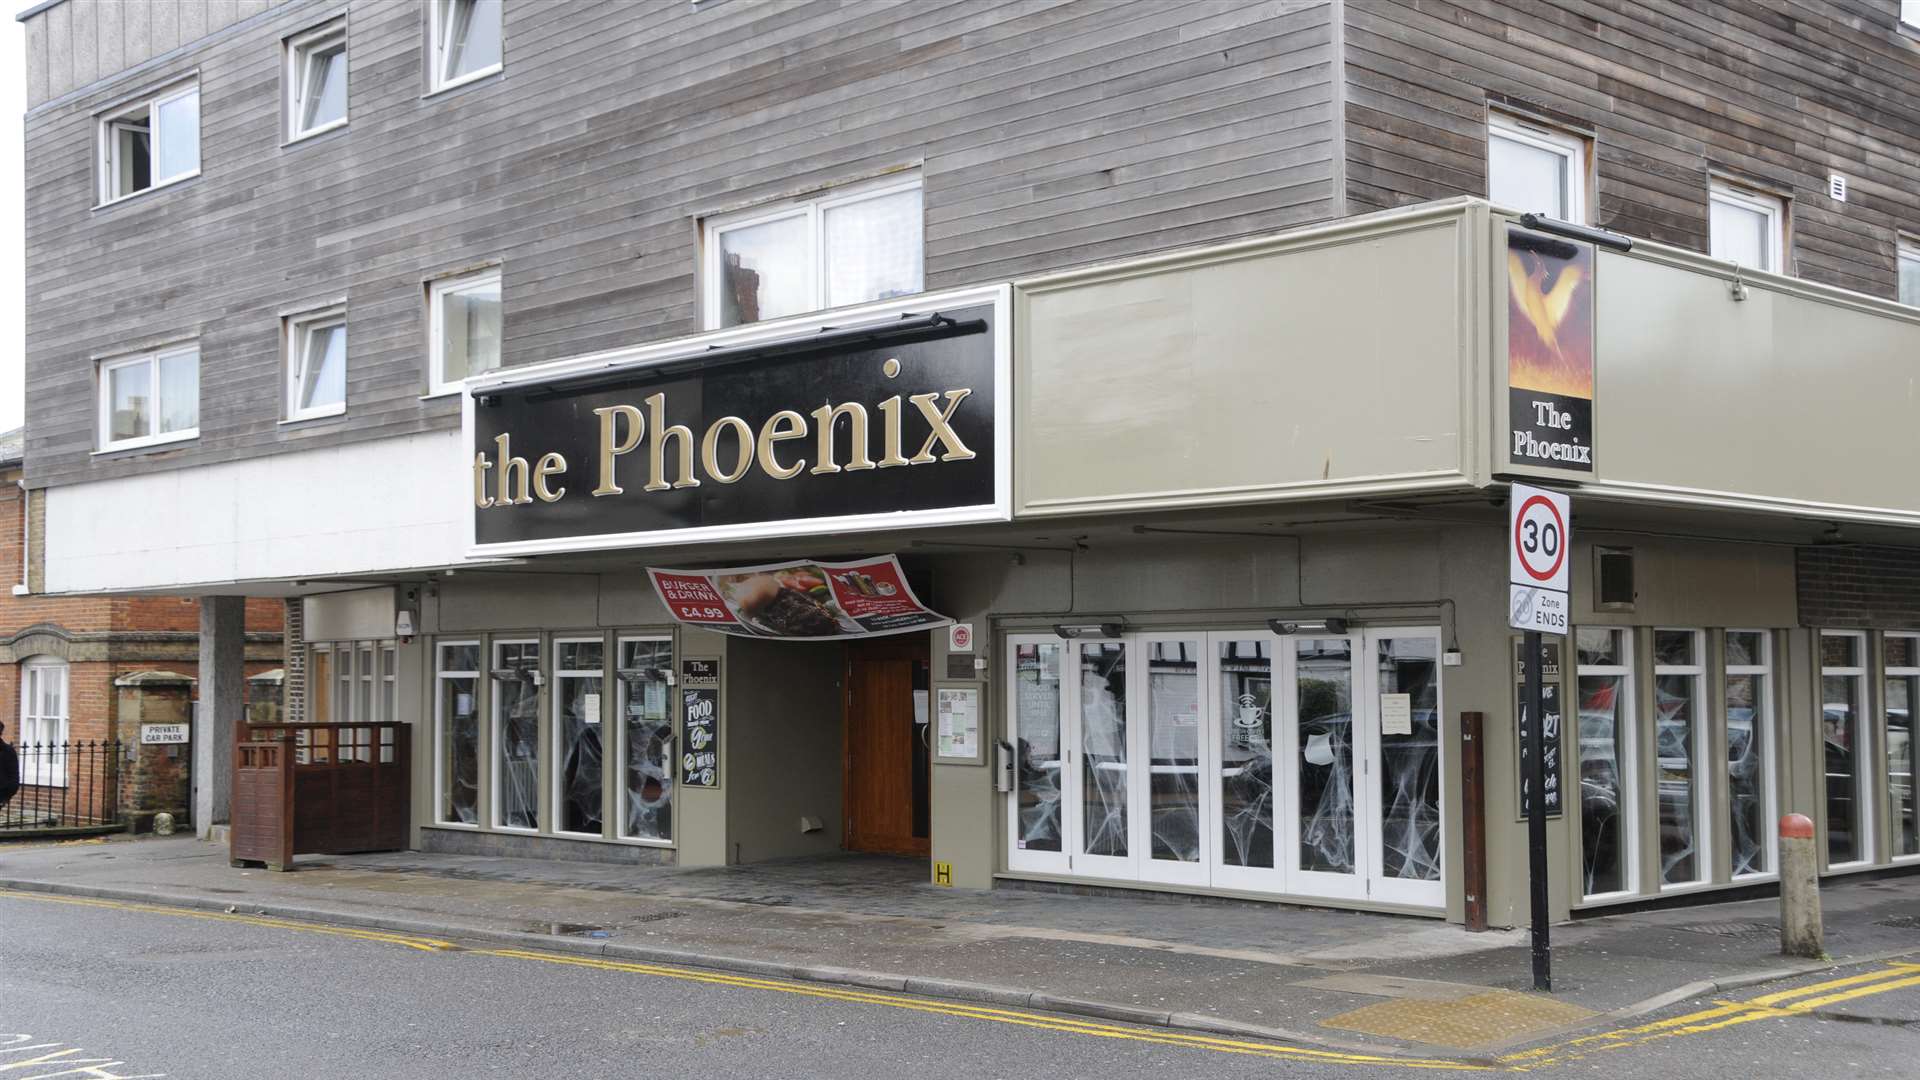 The Phoenix is set to reopen